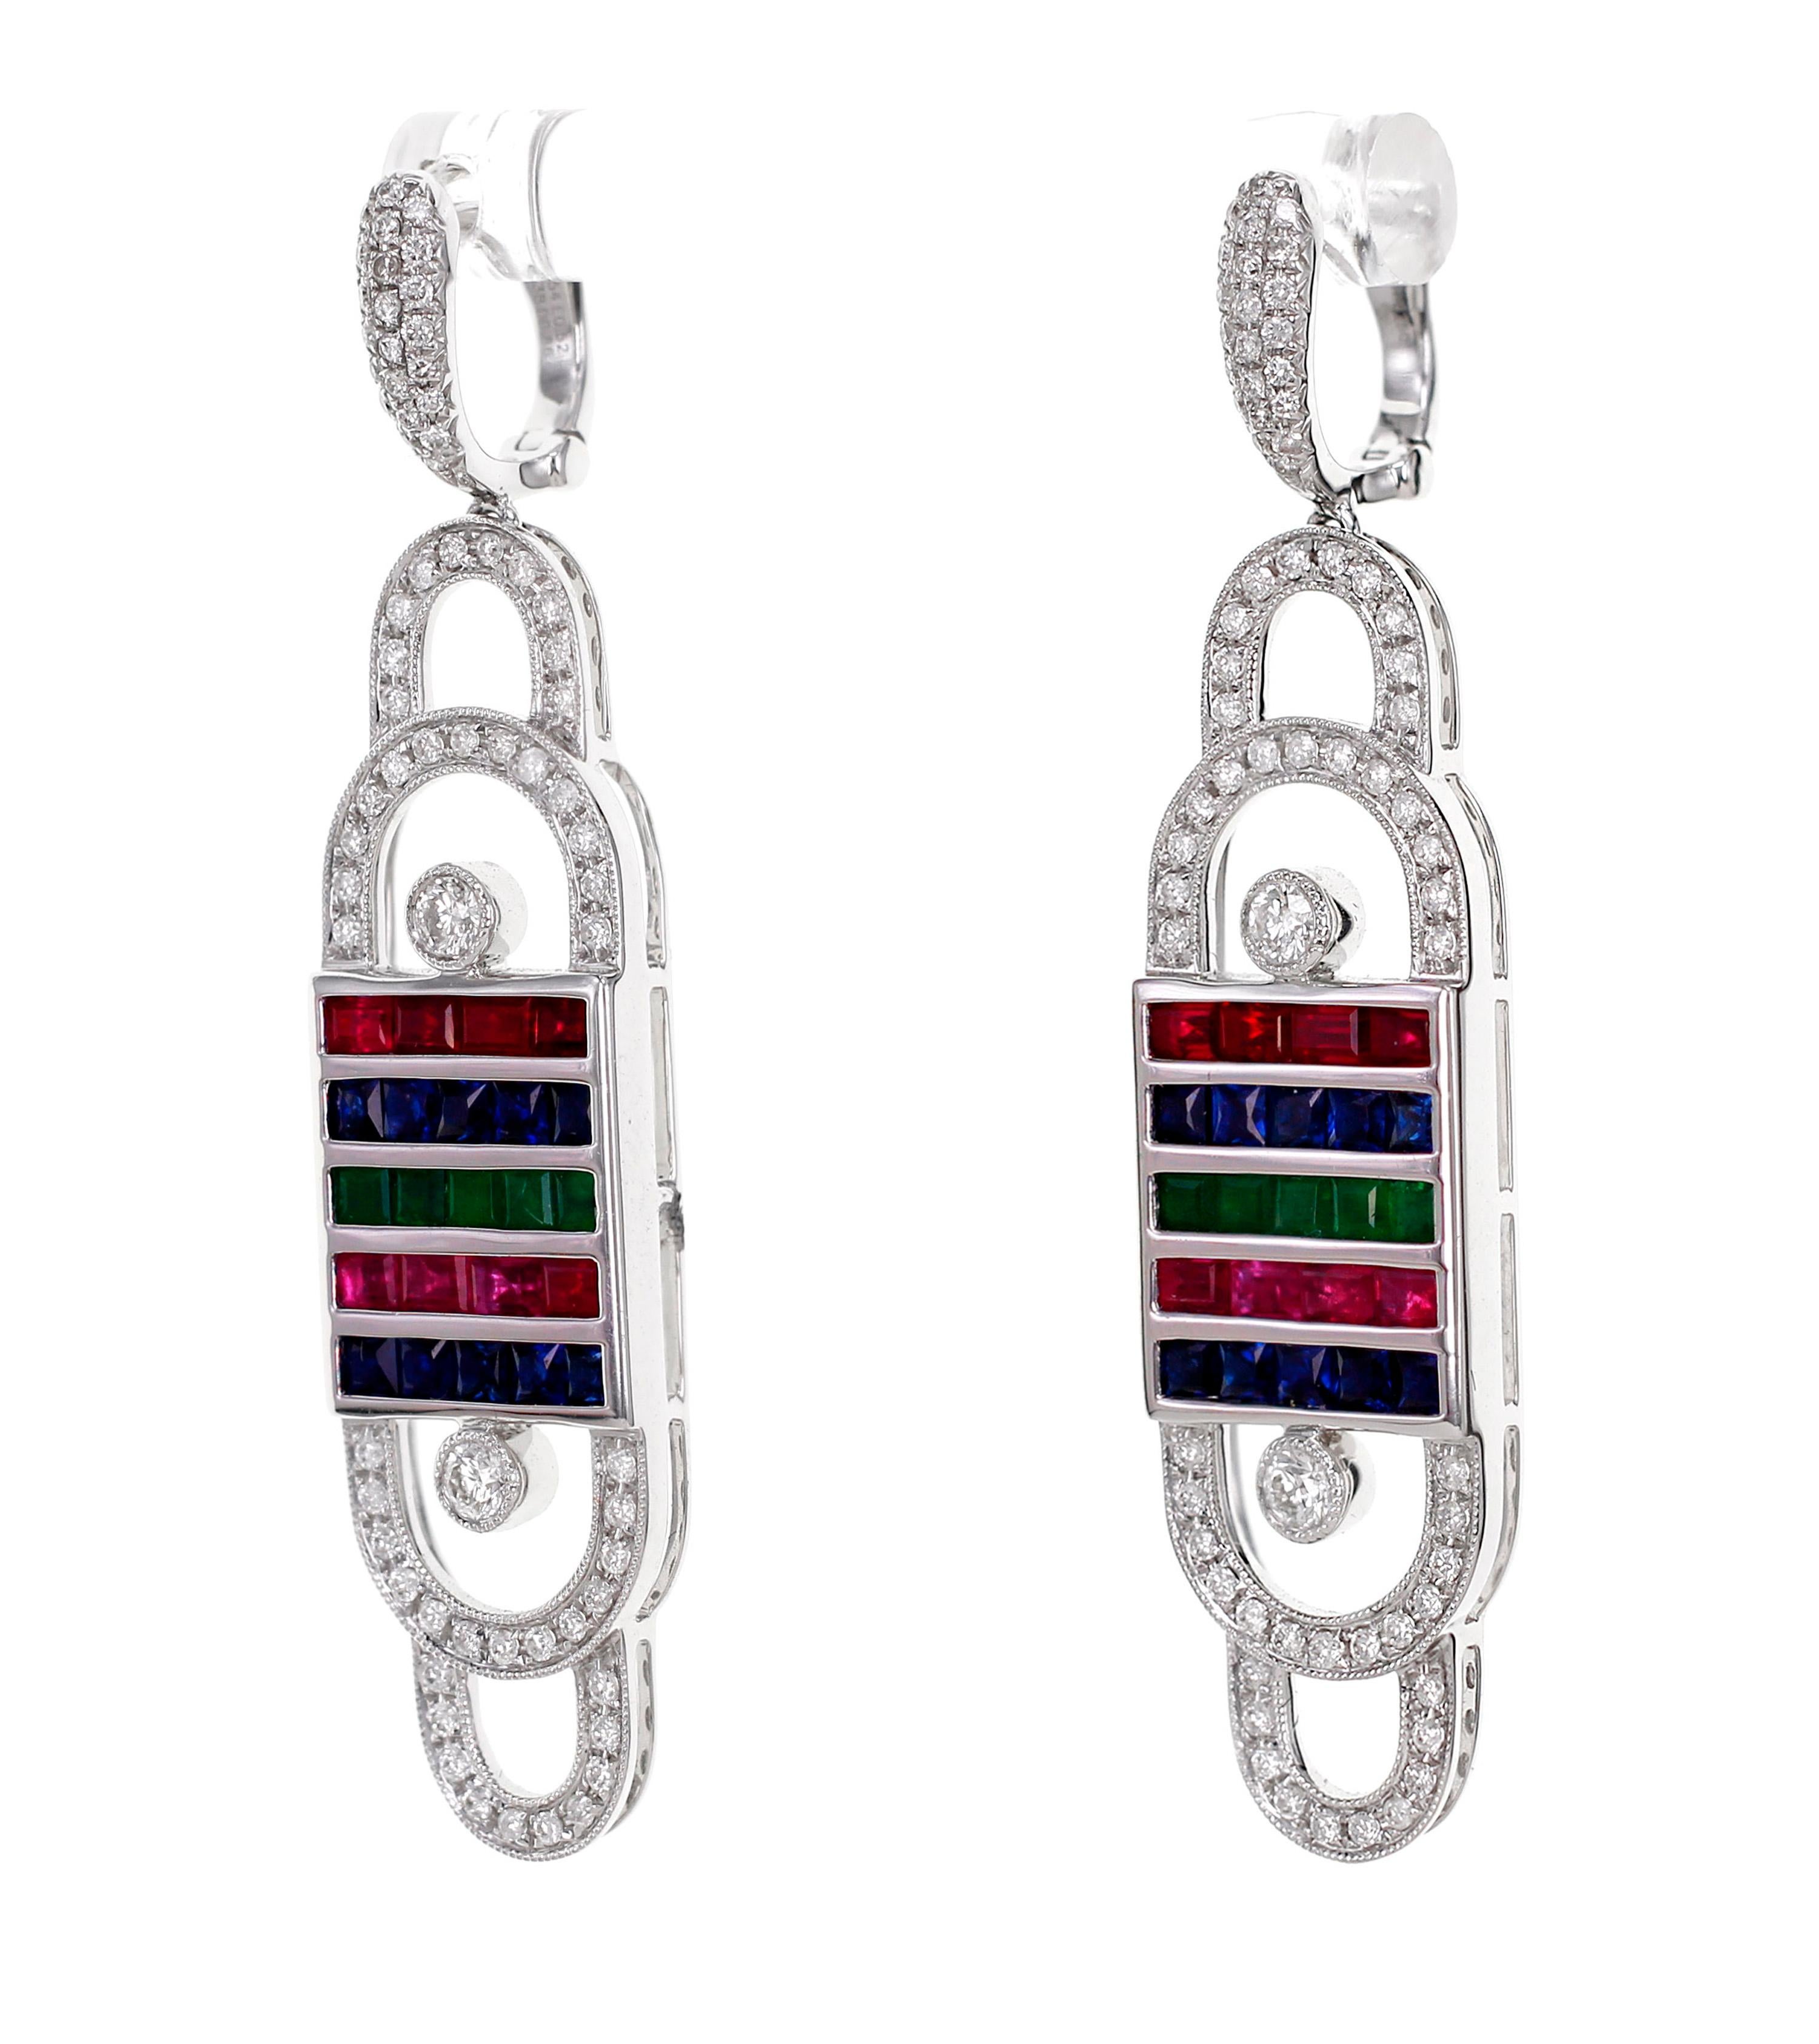 Ruby , Sapphire and Emerald are used in this wacky design. In a twist to art deco, this earring gives a nostalgic feel to old televison set display and smartphone display. 